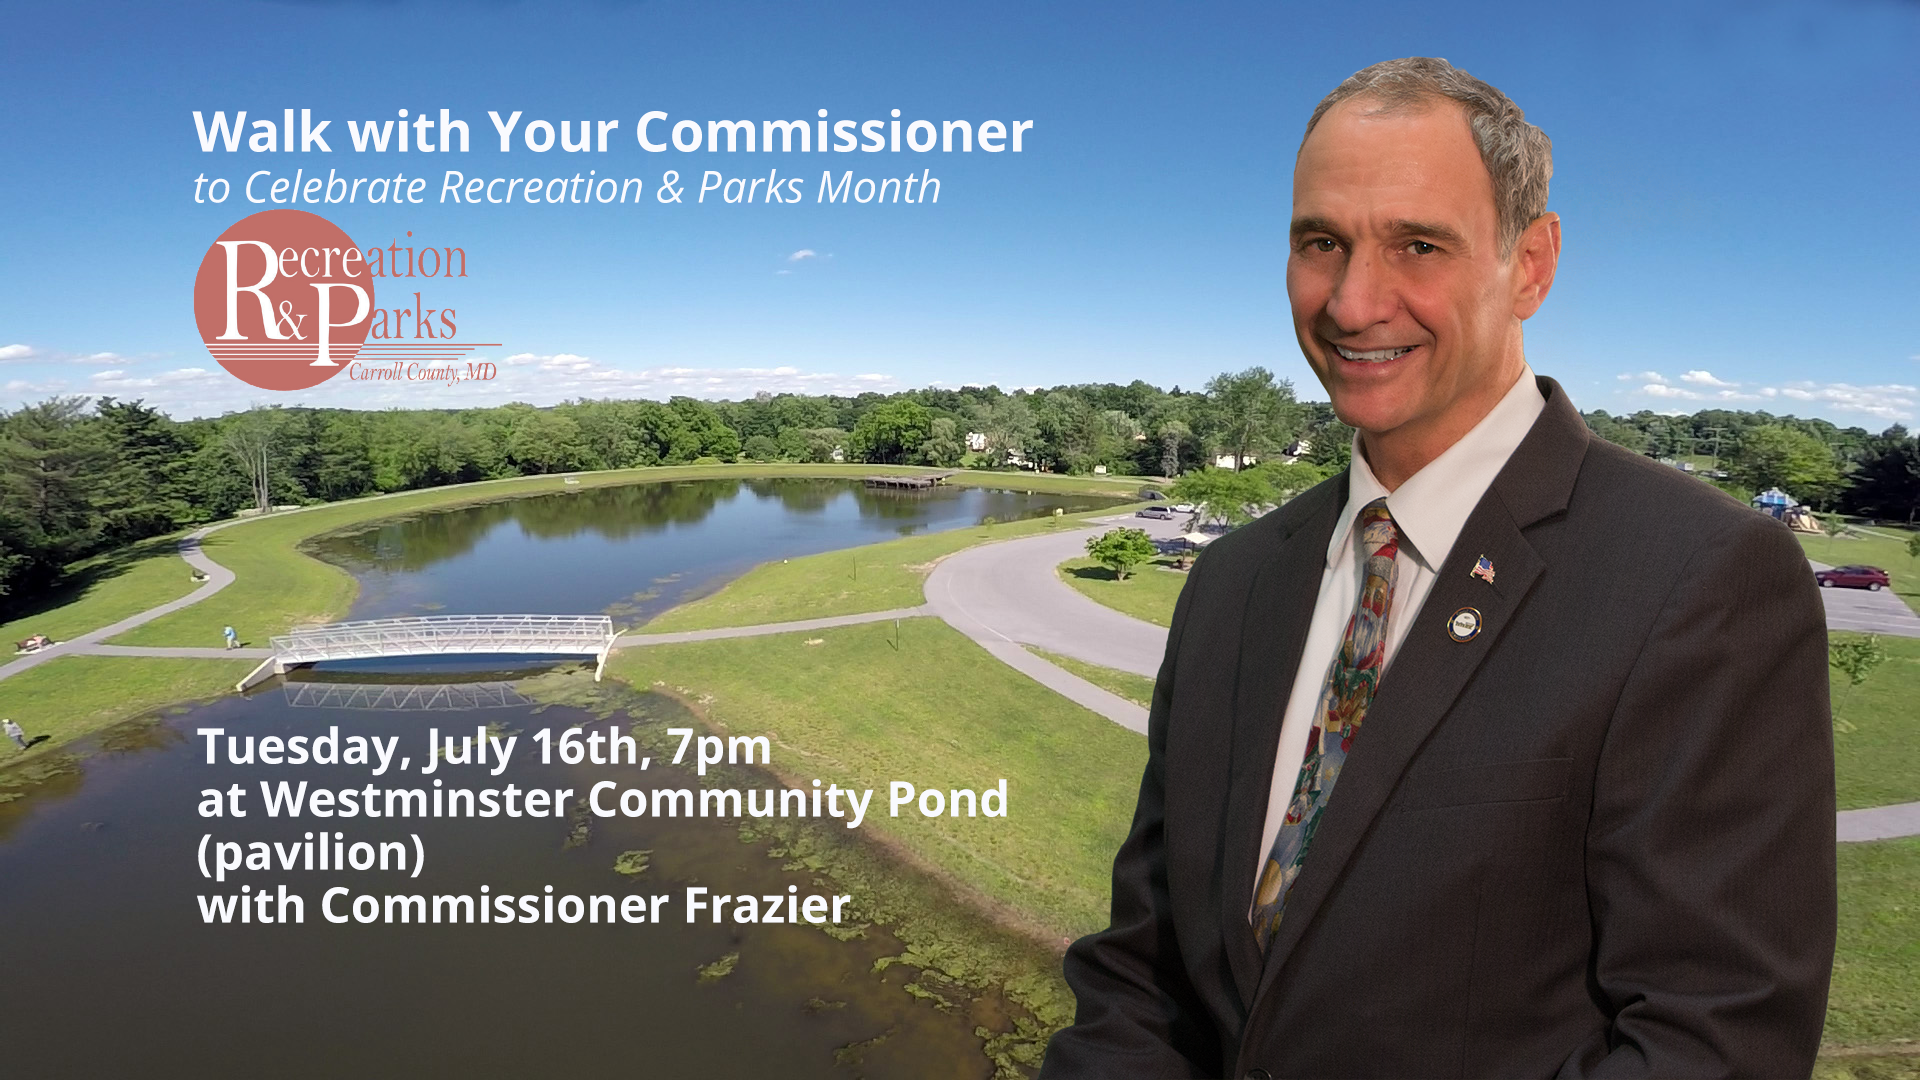 Walk with Commissioner Frazier